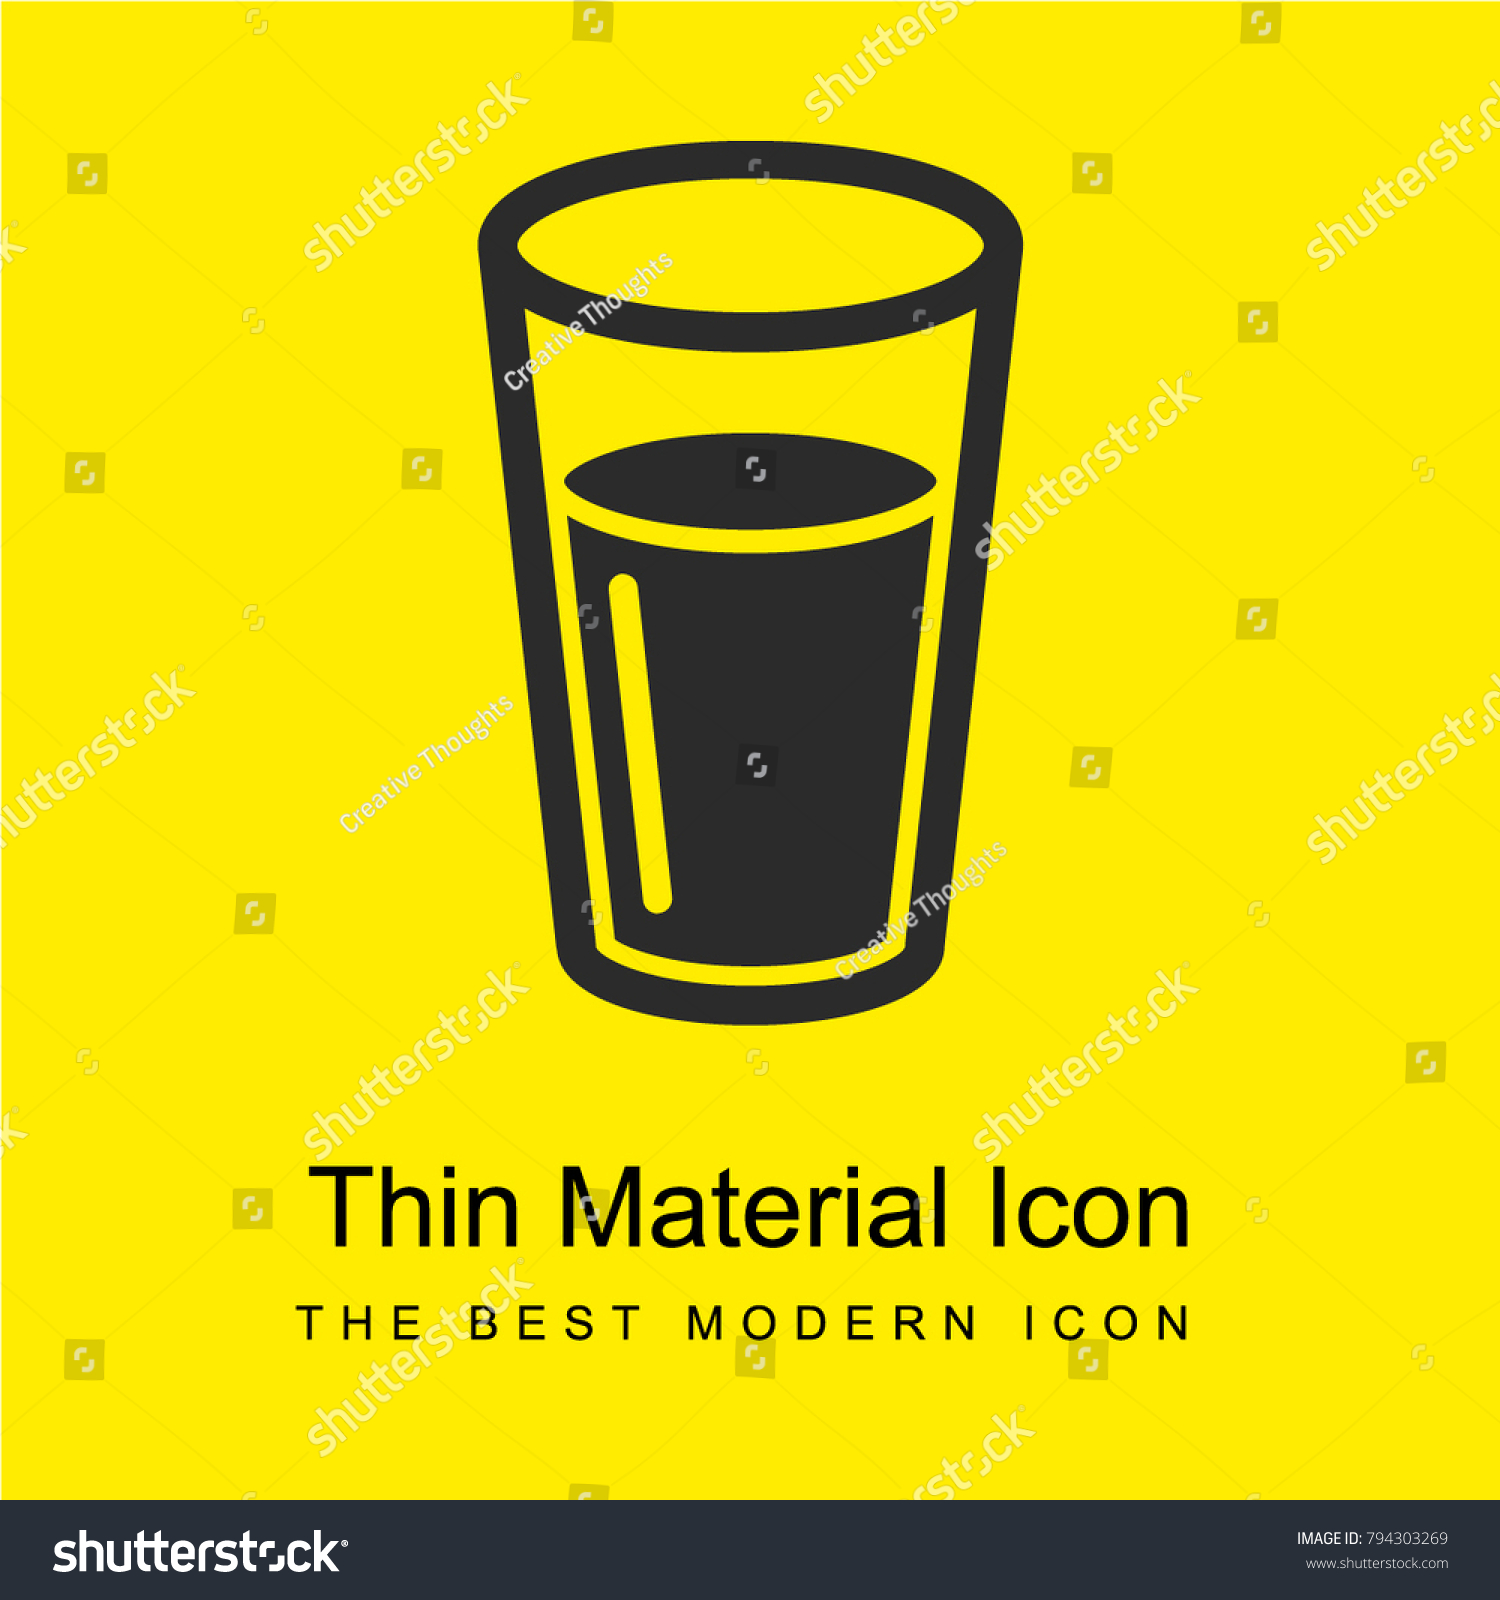 Download Glass Dark Drink Bright Yellow Material Stock Vector Royalty Free 794303269 Yellowimages Mockups